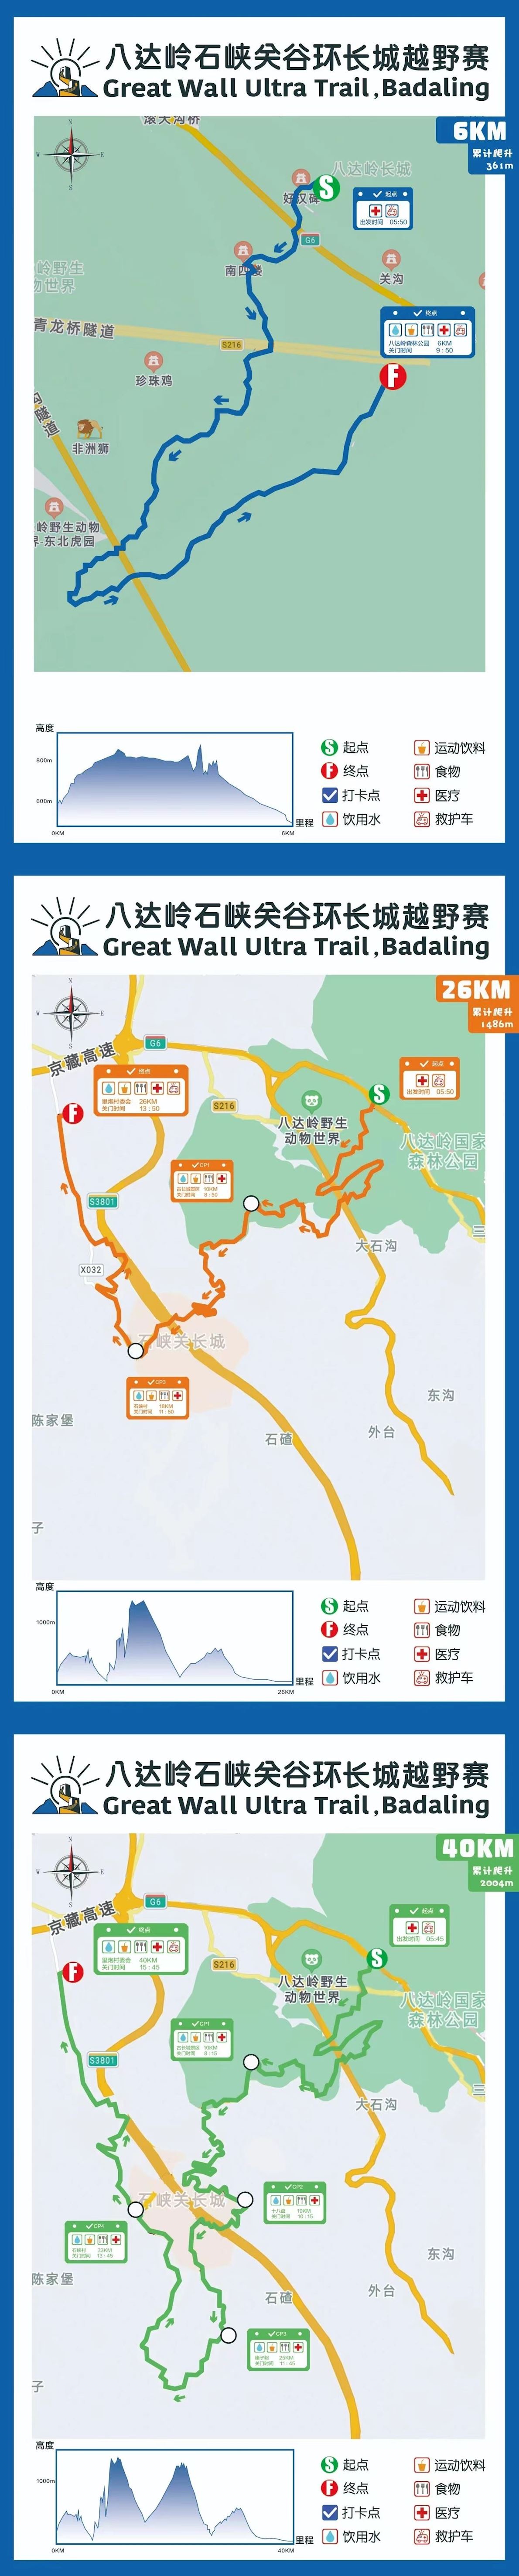 Great Wall Ultra Trail, Badaling Route Map